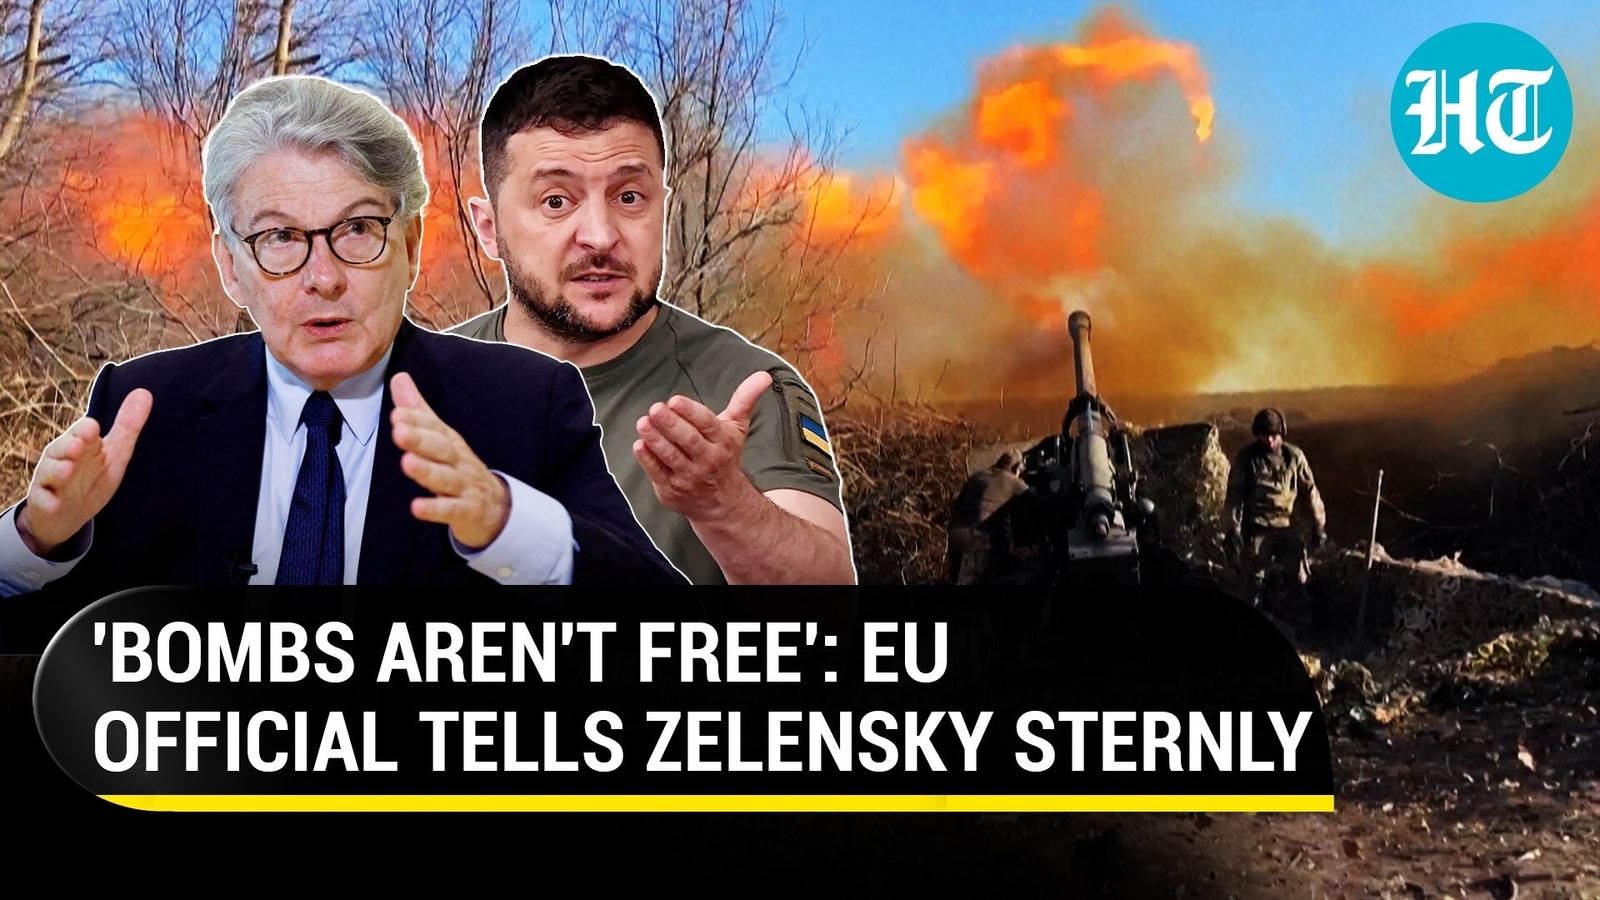 'Won't Give Bombs For Free': EU Official Gets Blunt With Zelensky As Russia Advances At Frontline